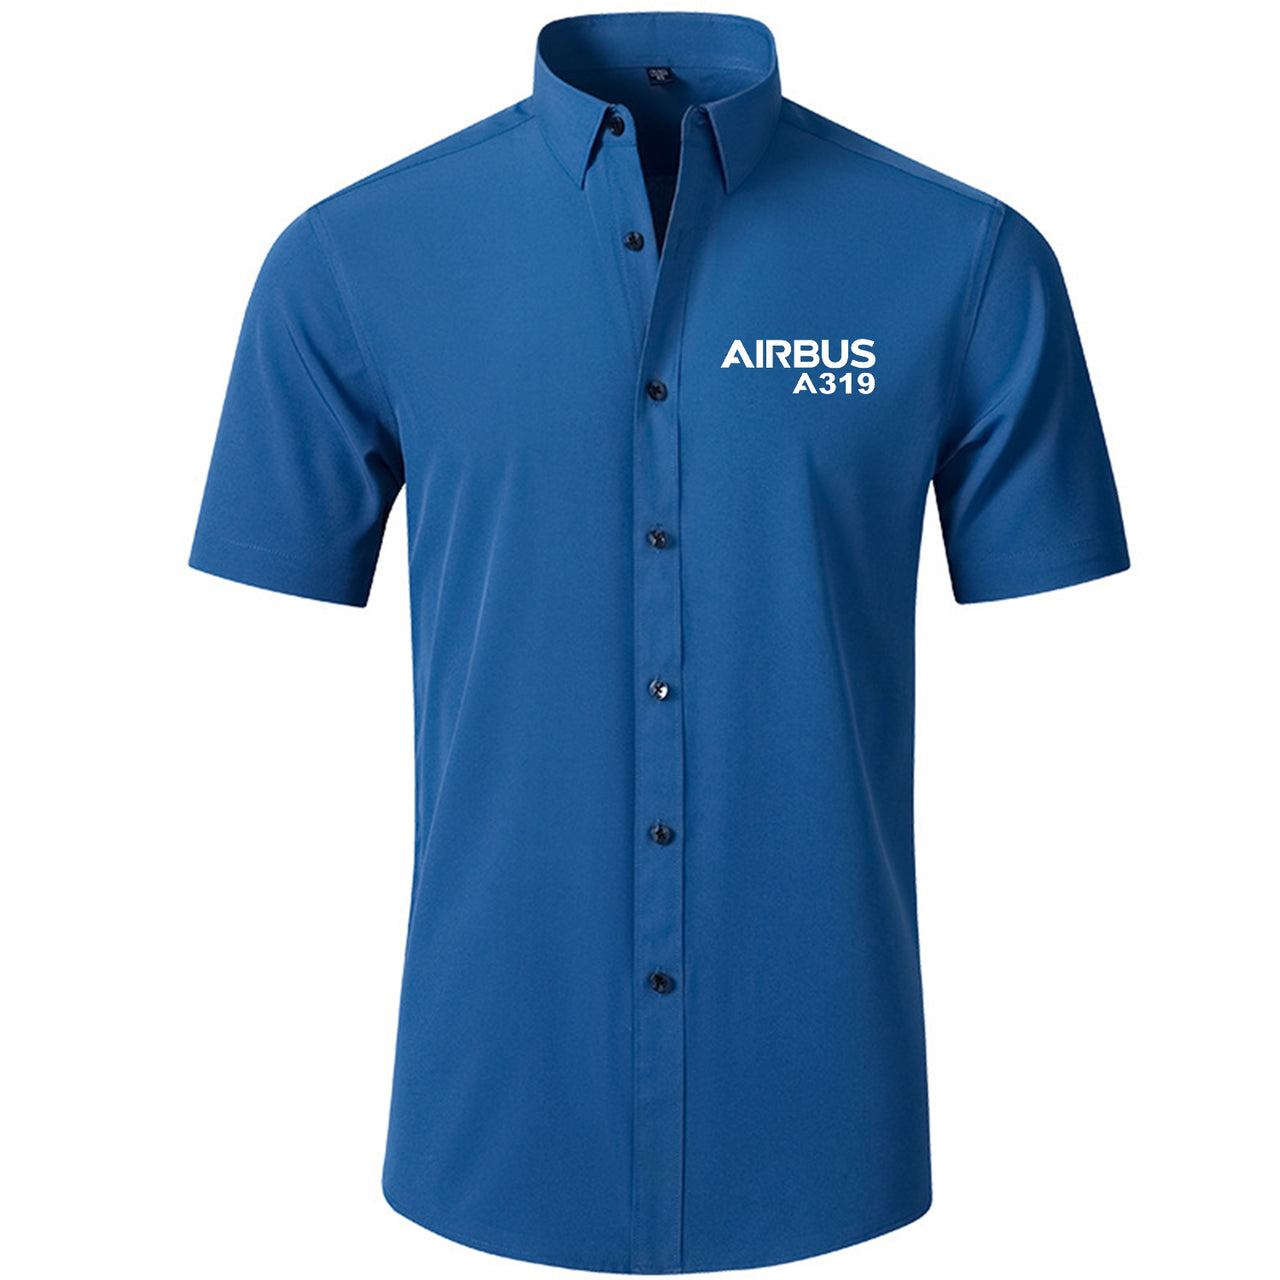 Airbus A319 & Text Designed Short Sleeve Shirts